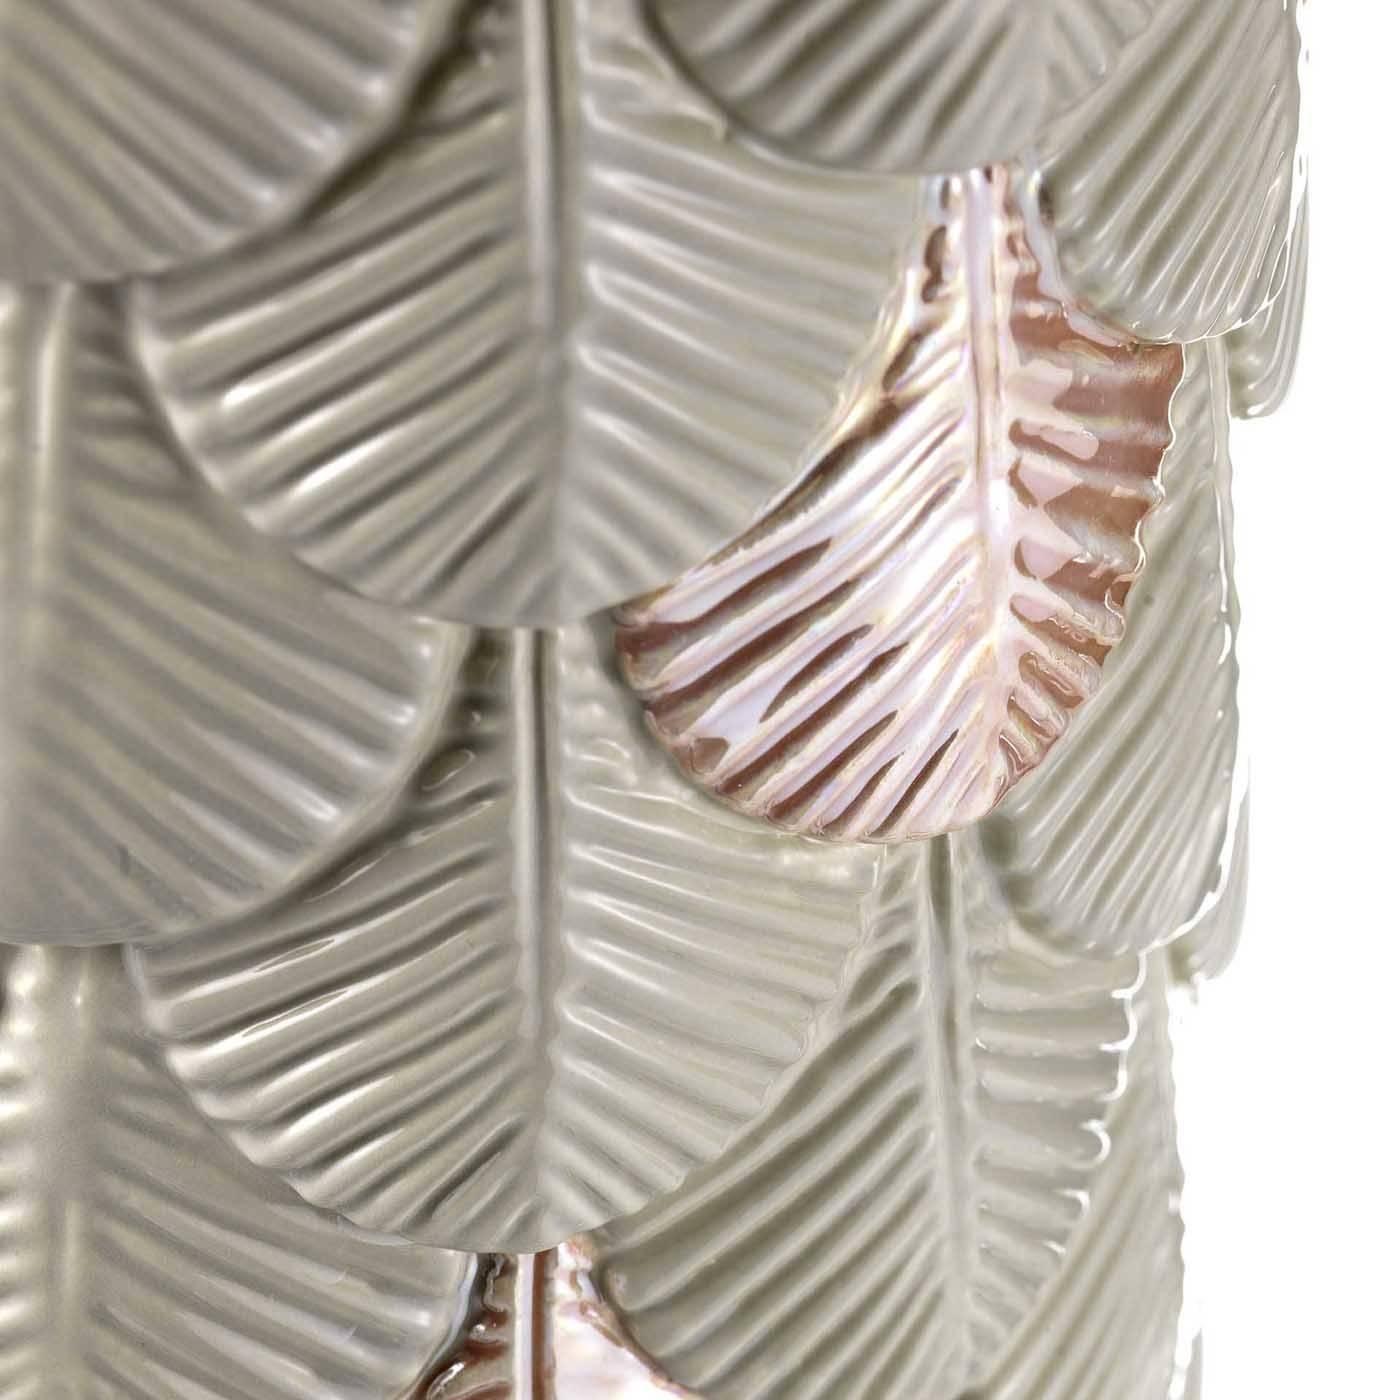 This striking vase, designed for BottegaNove by Cristina Celestino, features a simple cylindrical shape adorned throughout by parallel rows of feathers with a hand-applied finish in grey with a green undertone. Here and there, the artisans who made